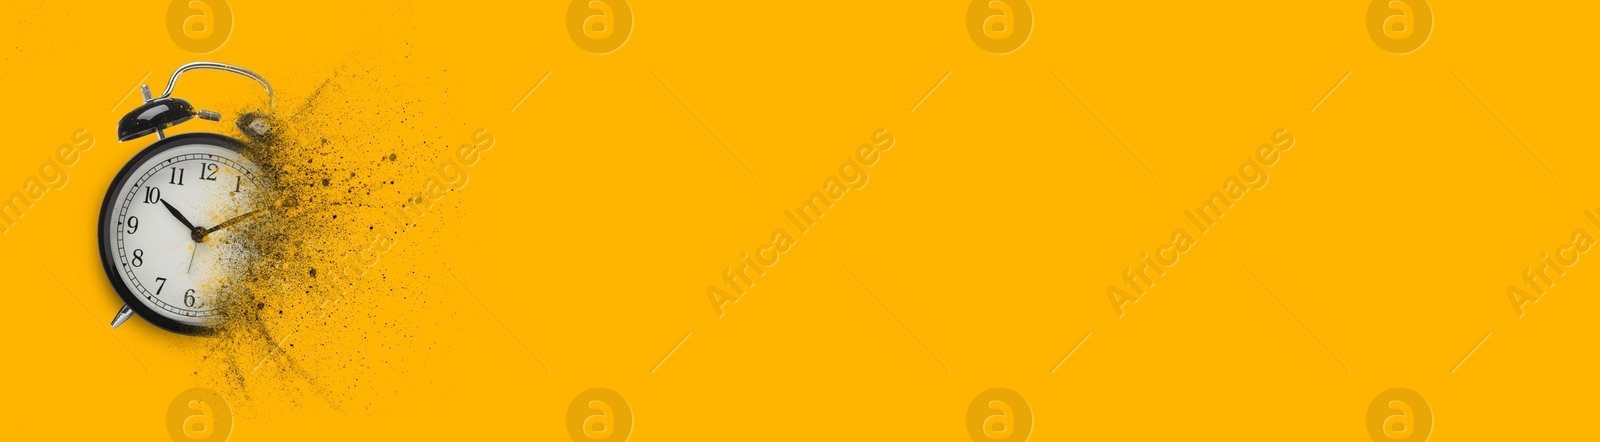 Image of Black alarm clock dissolving on orange background, banner design with space for text. Flow of time